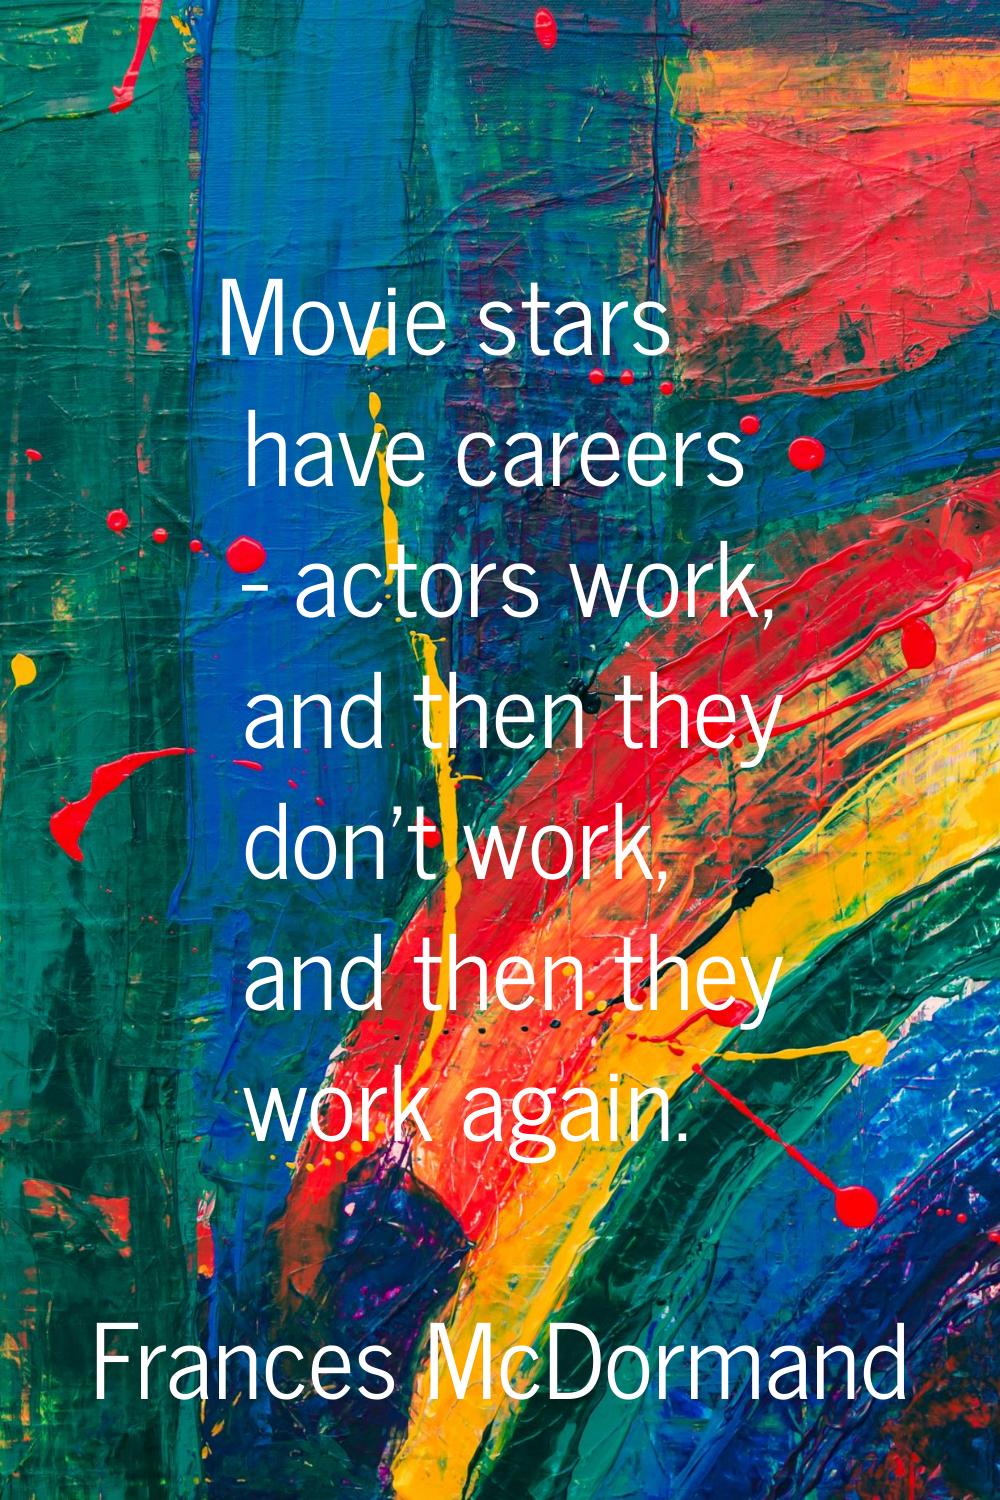 Movie stars have careers - actors work, and then they don't work, and then they work again.